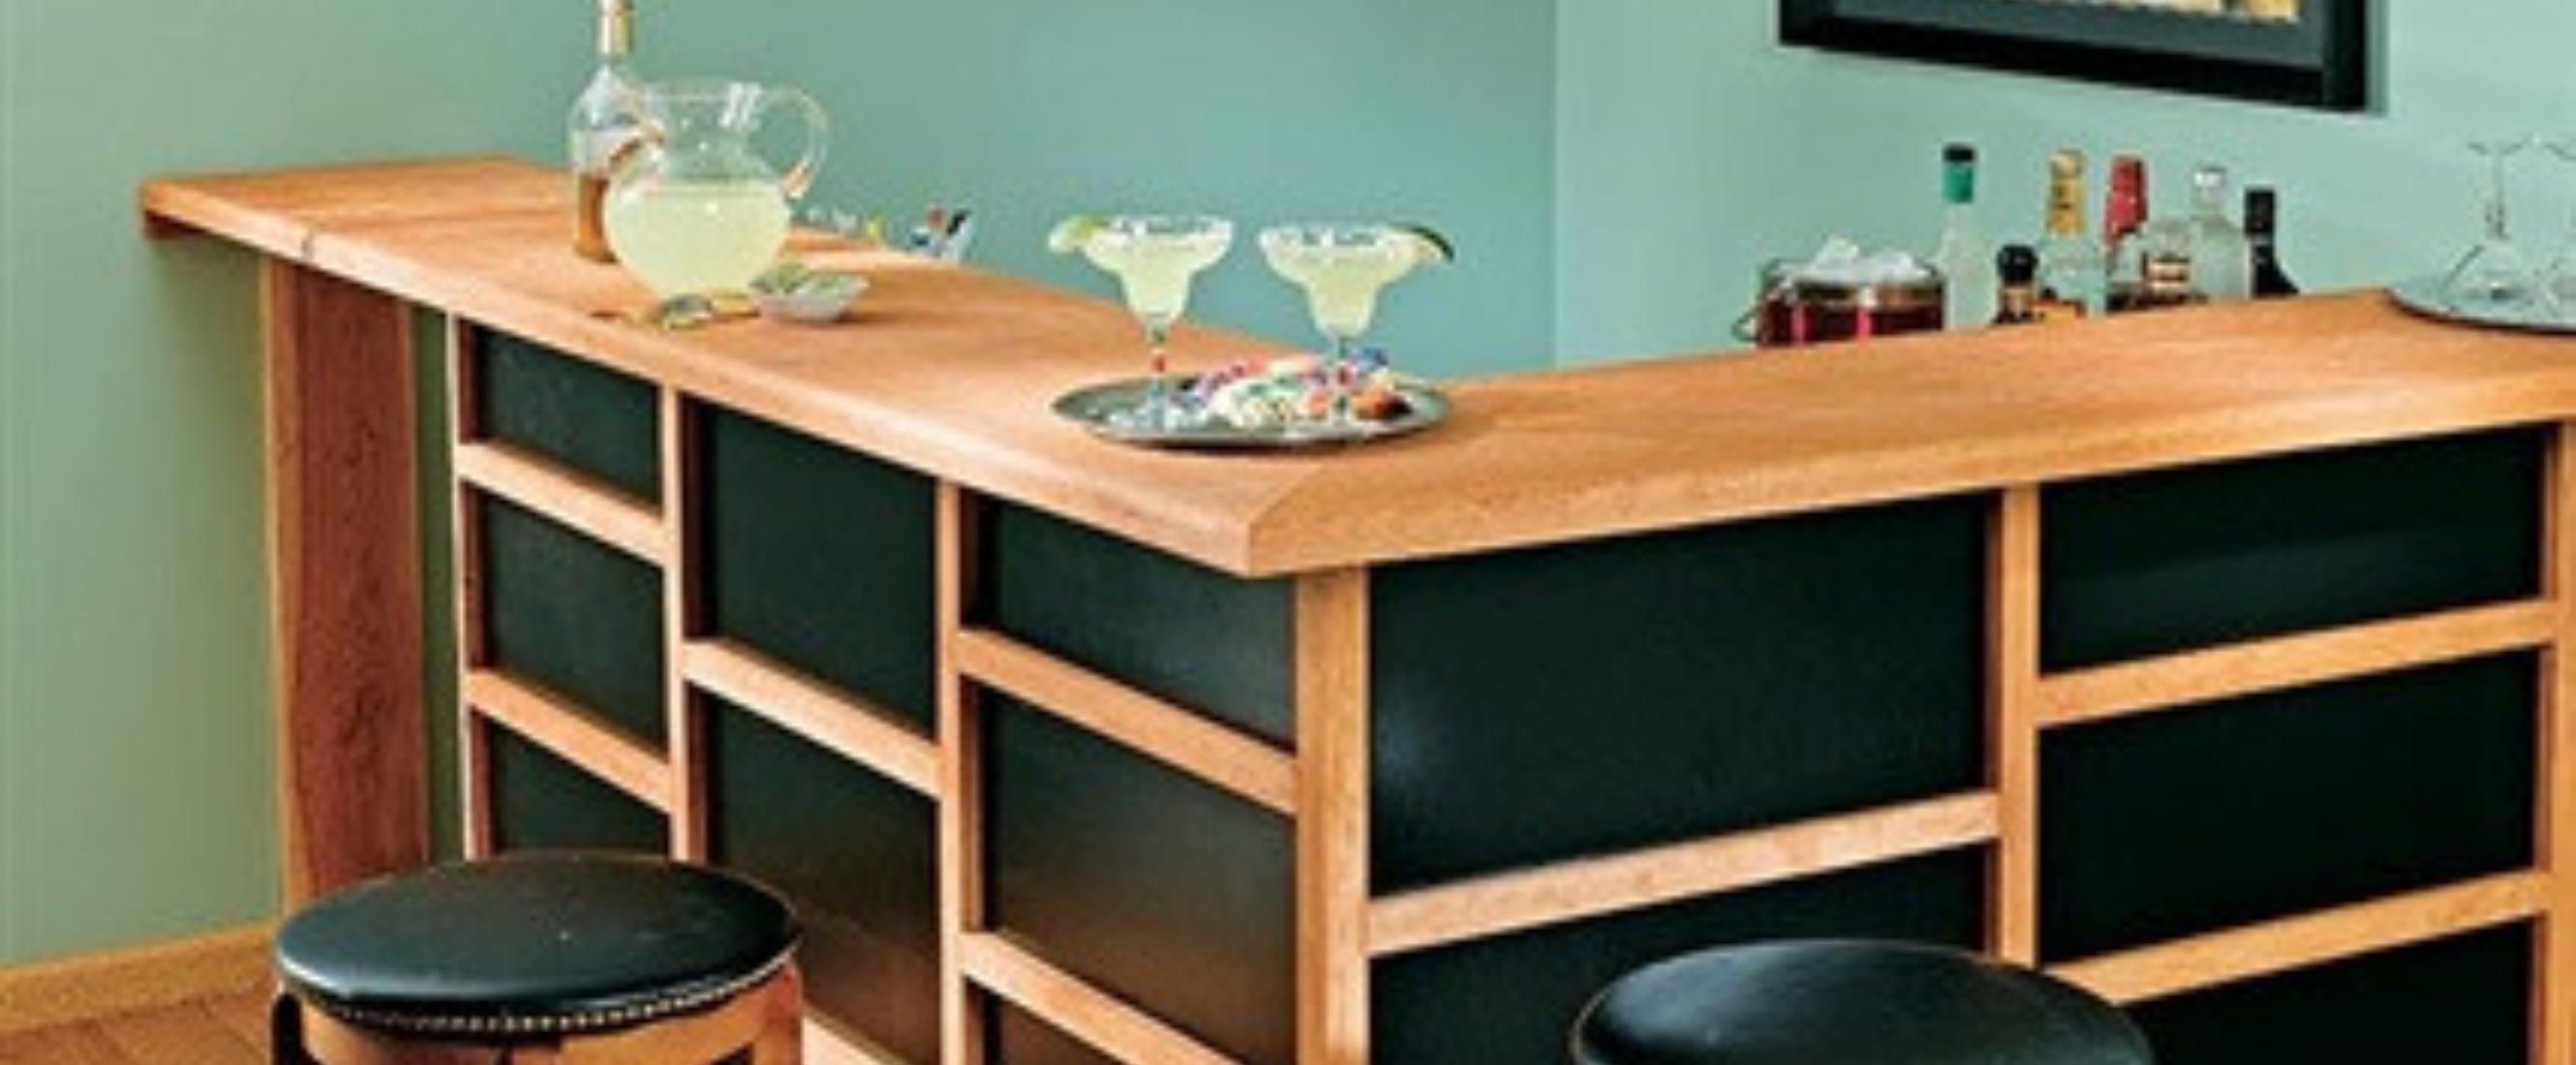 How to Build a Home Bar Without Going Broke